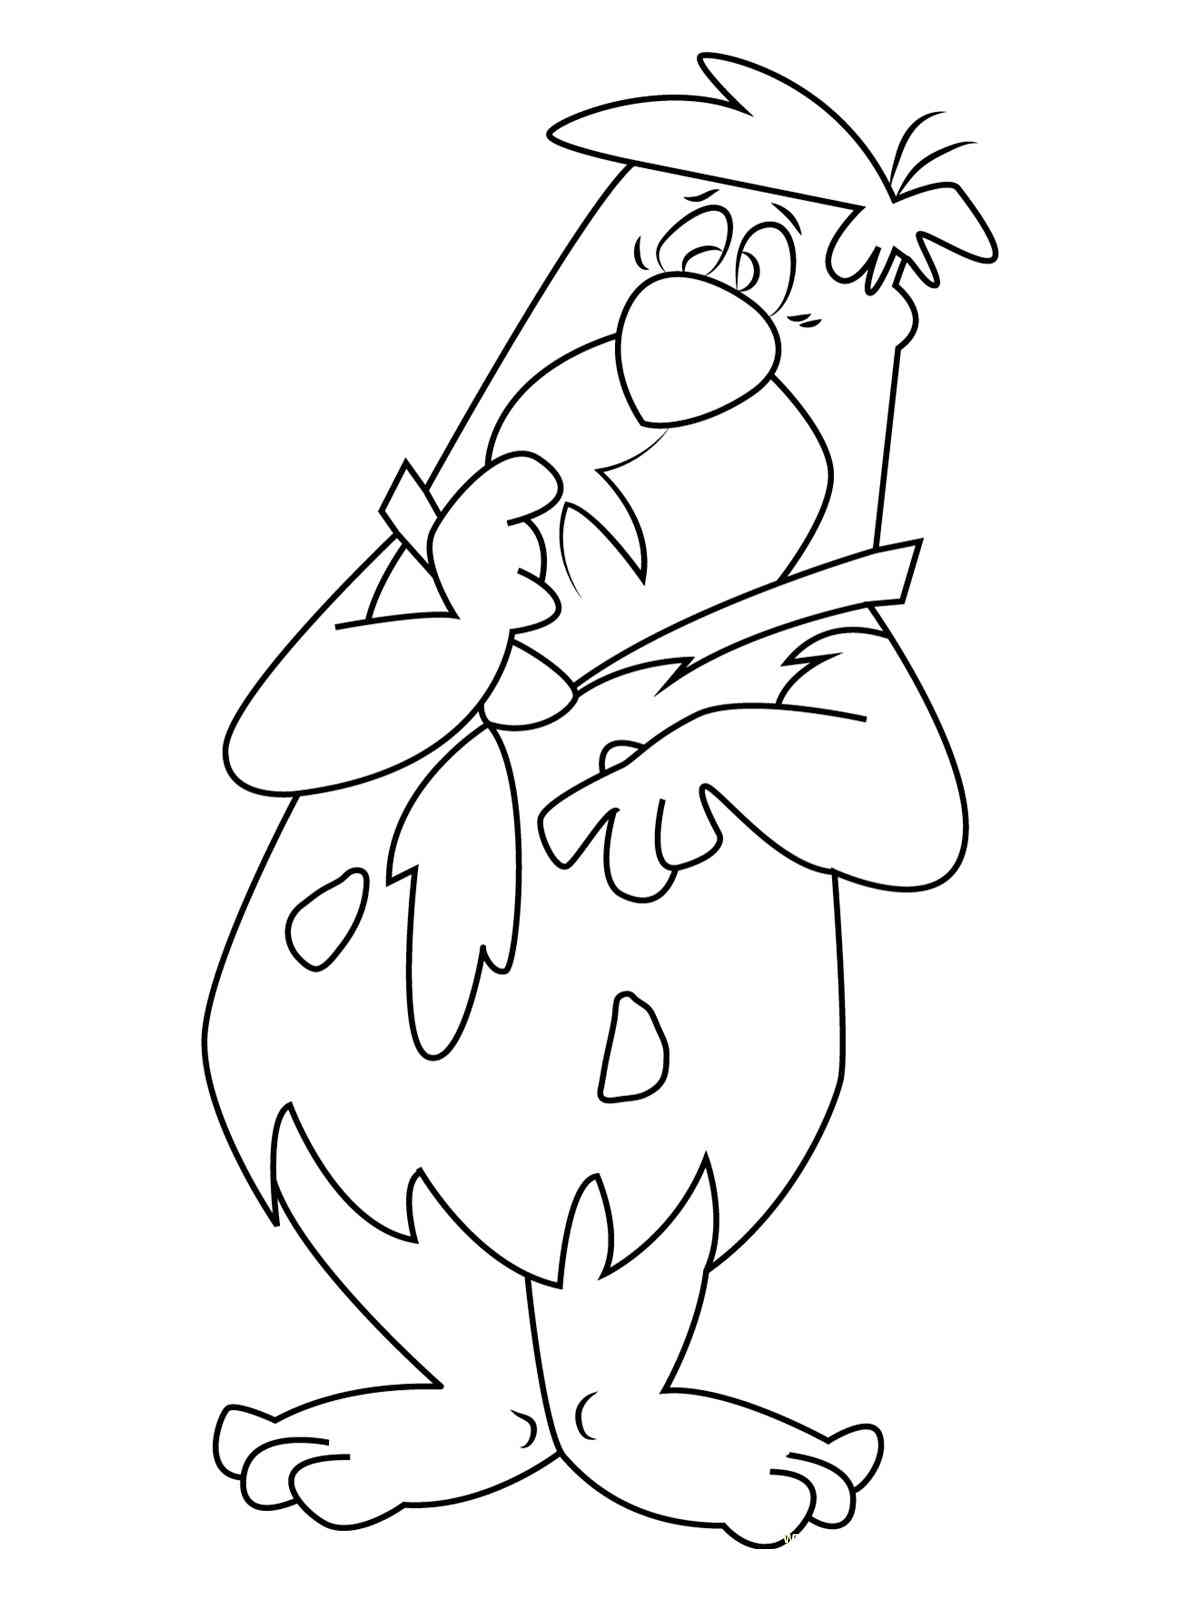 Fred Flintstone 4 coloring page